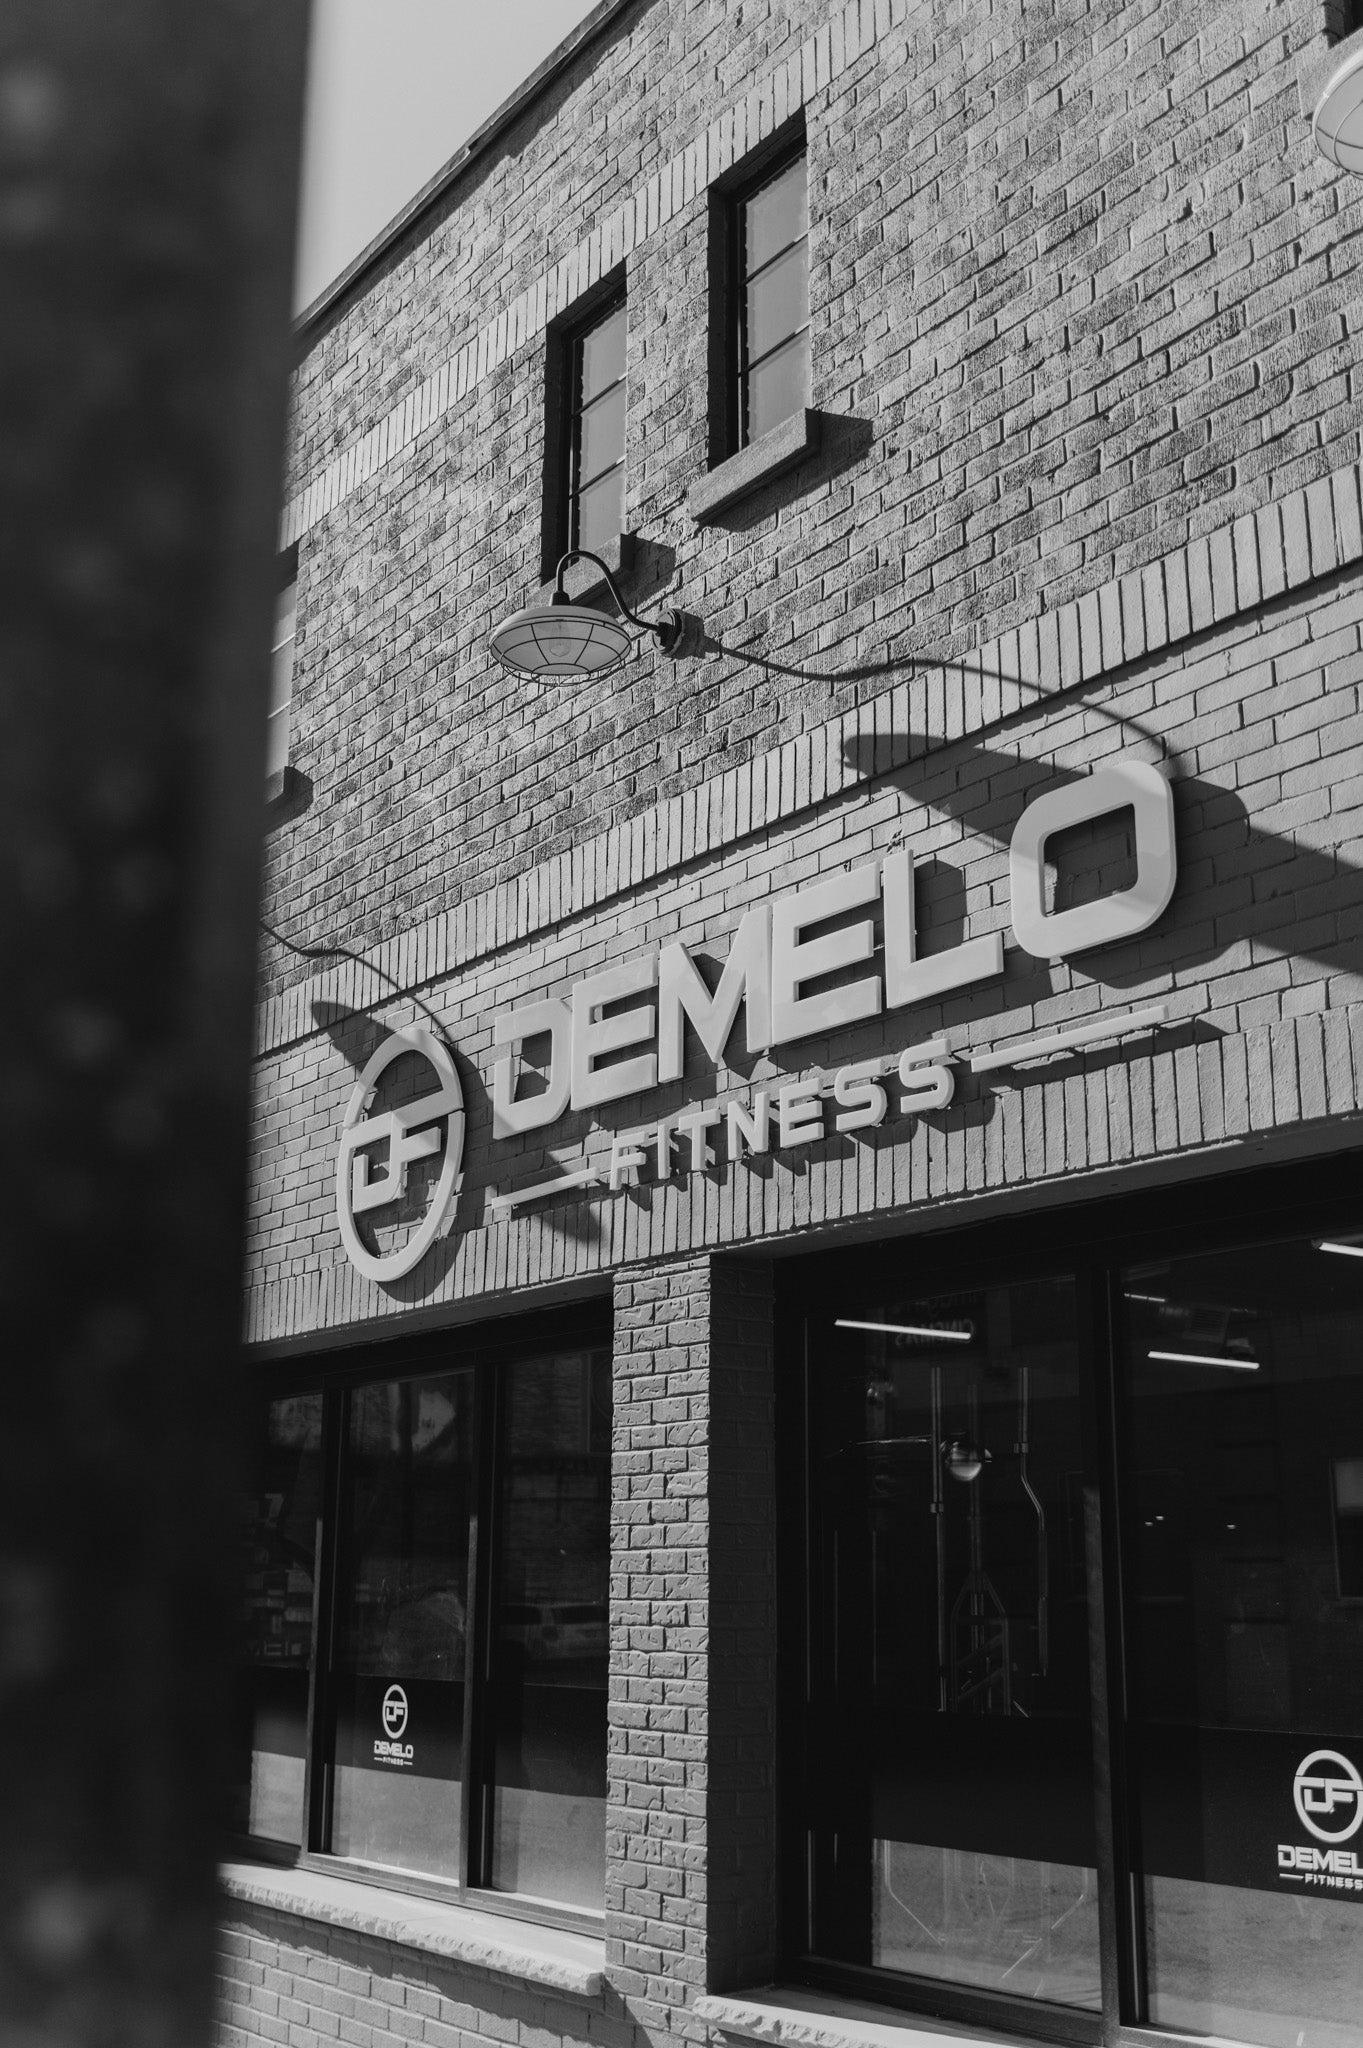 DeMelo Fitness building exterior in a grayscale, displaying the logo on the front of the building